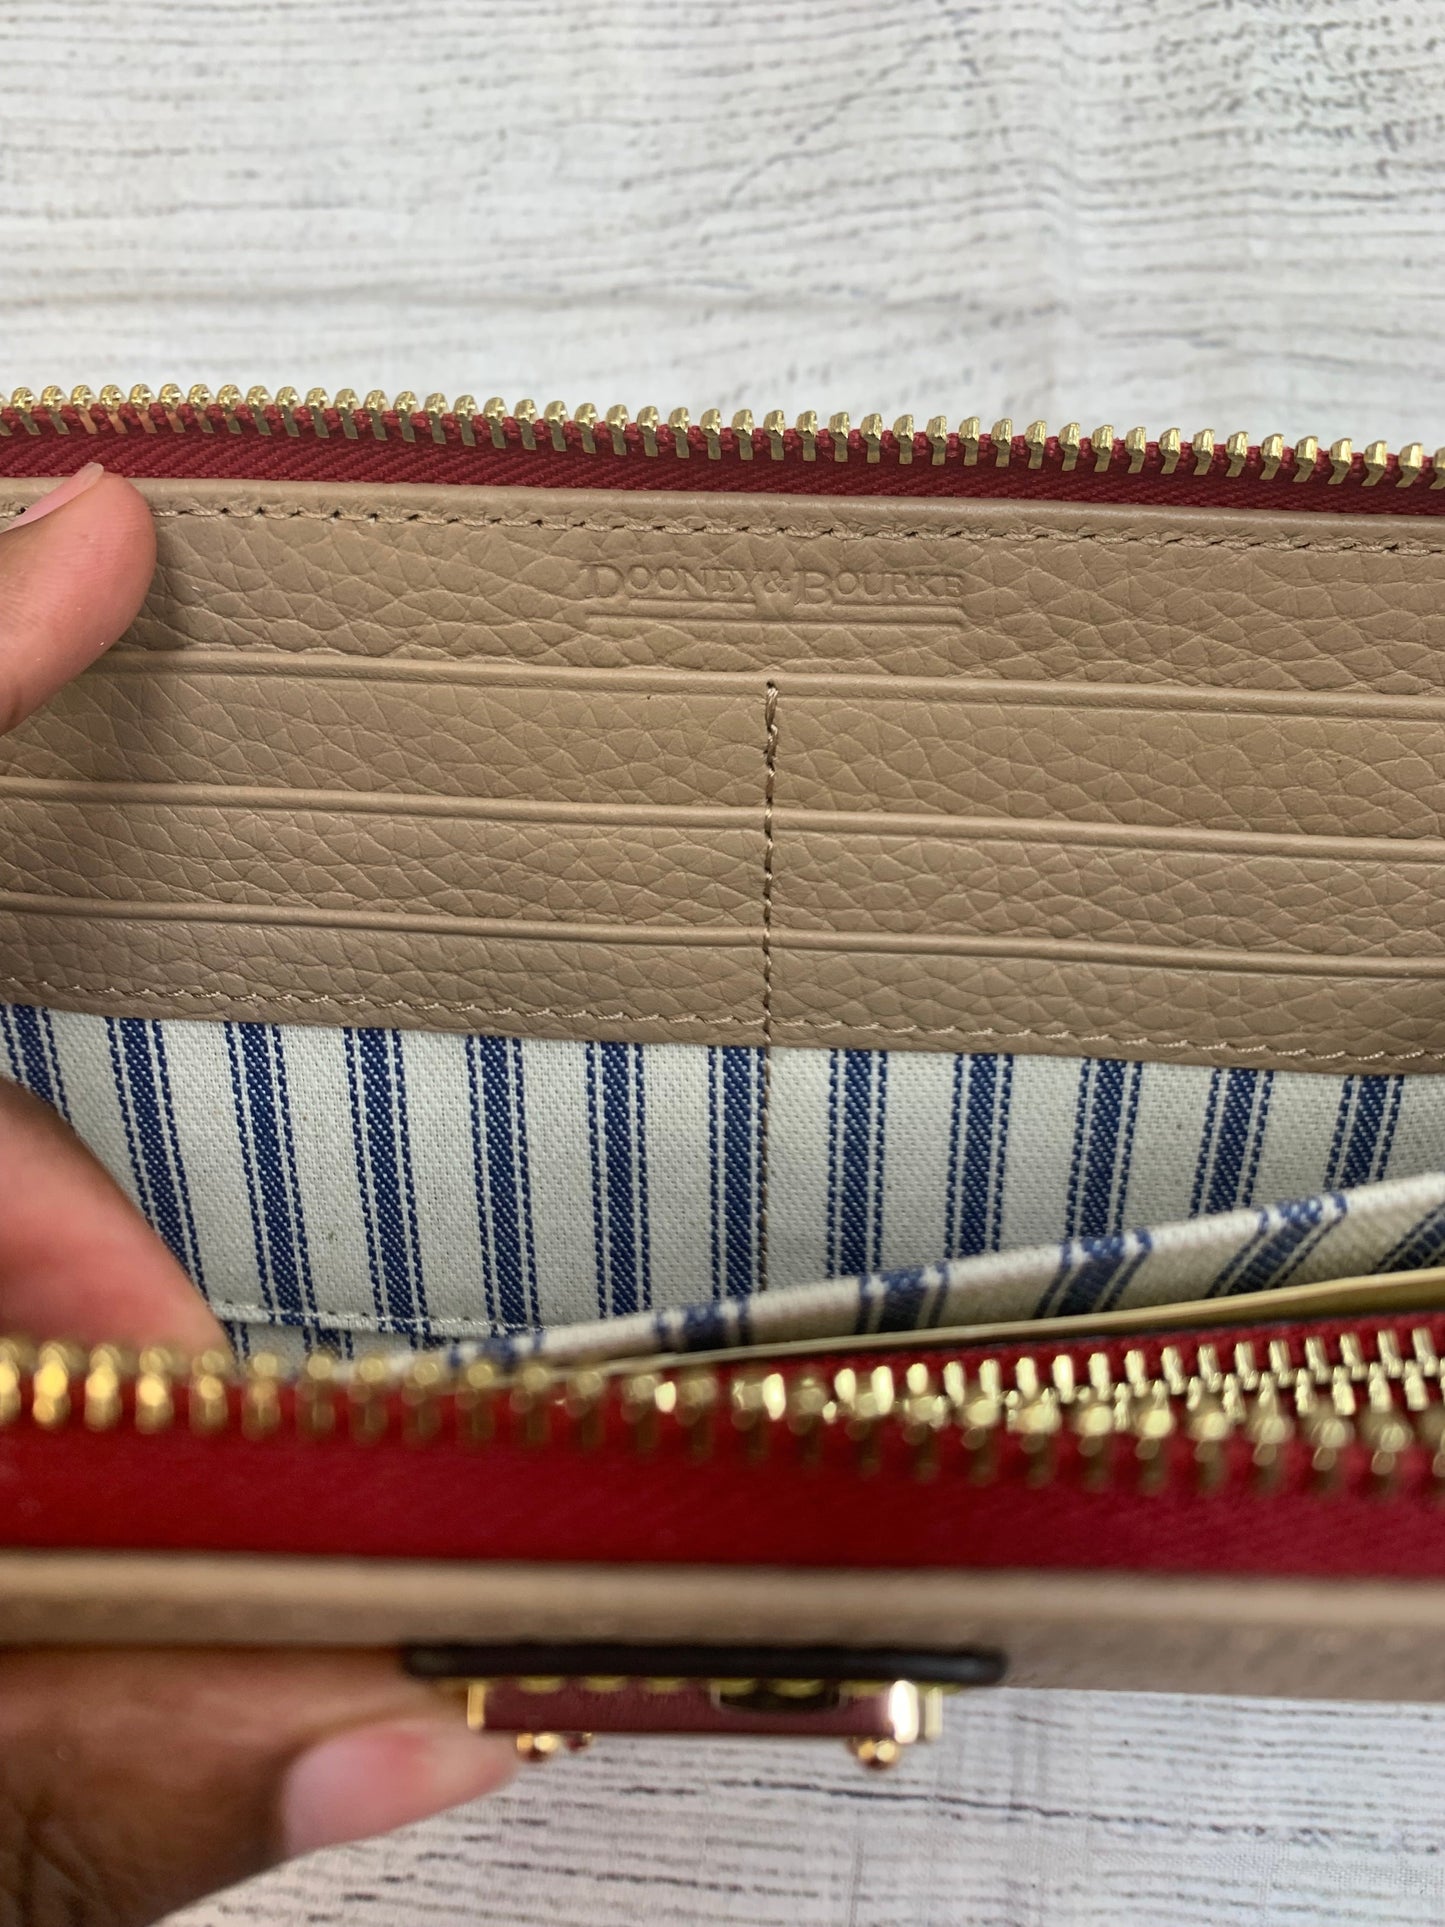 Wallet Leather Dooney And Bourke, Size Medium